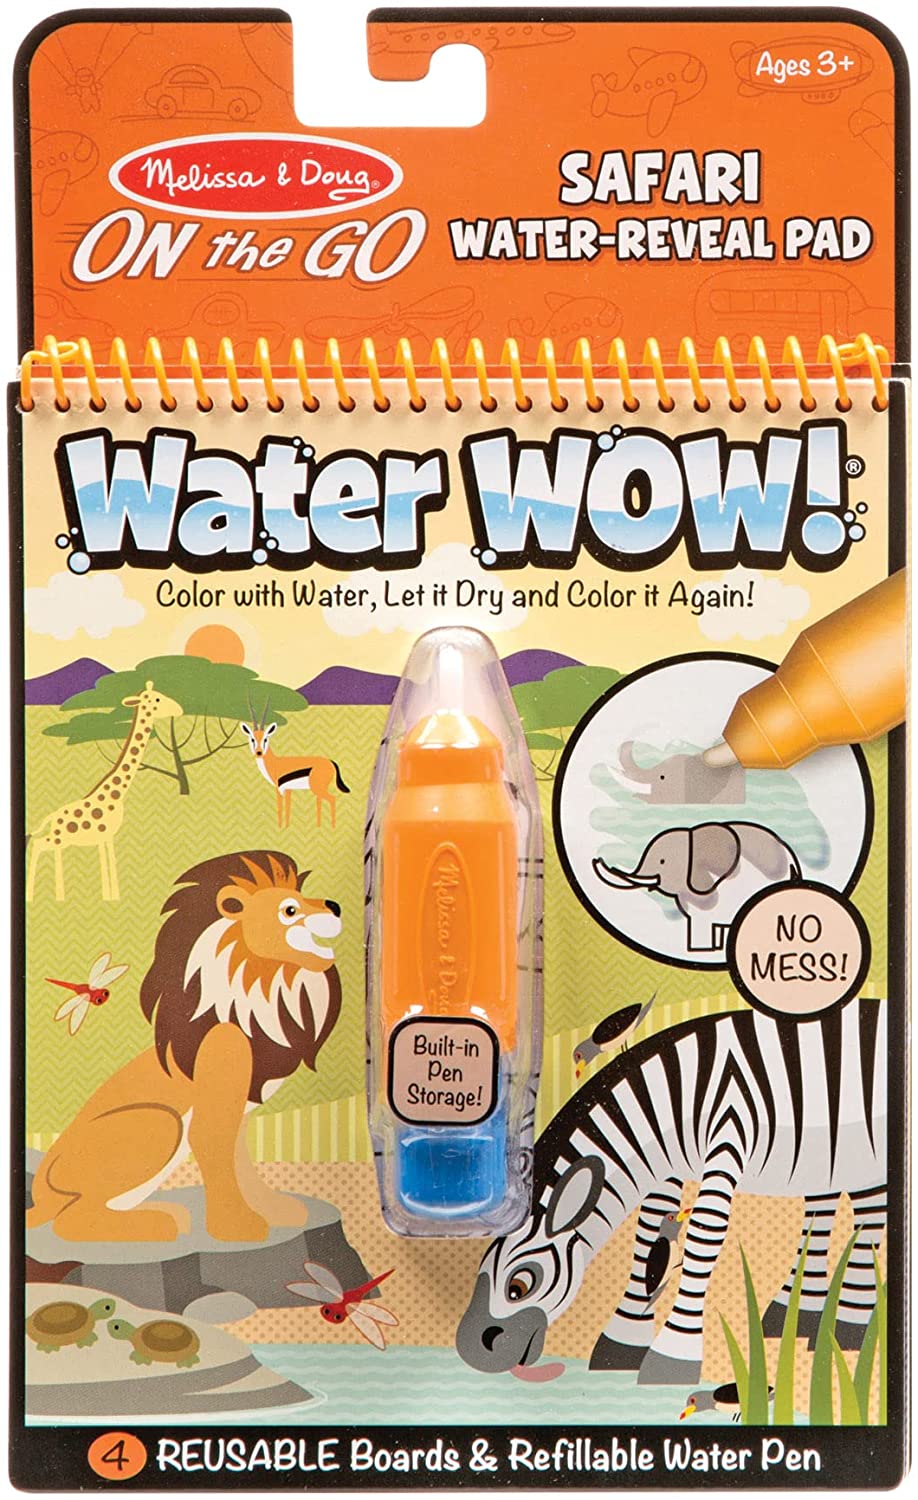  Melissa & Doug On the Go Water Wow! Reusable Water-Reveal  Activity Pads, 3-pk, Colors and Shapes, Fairy Tales, Animals - Travel Toys,  Stocking Stuffers, Mess Free Coloring For Kids Ages 3+ 